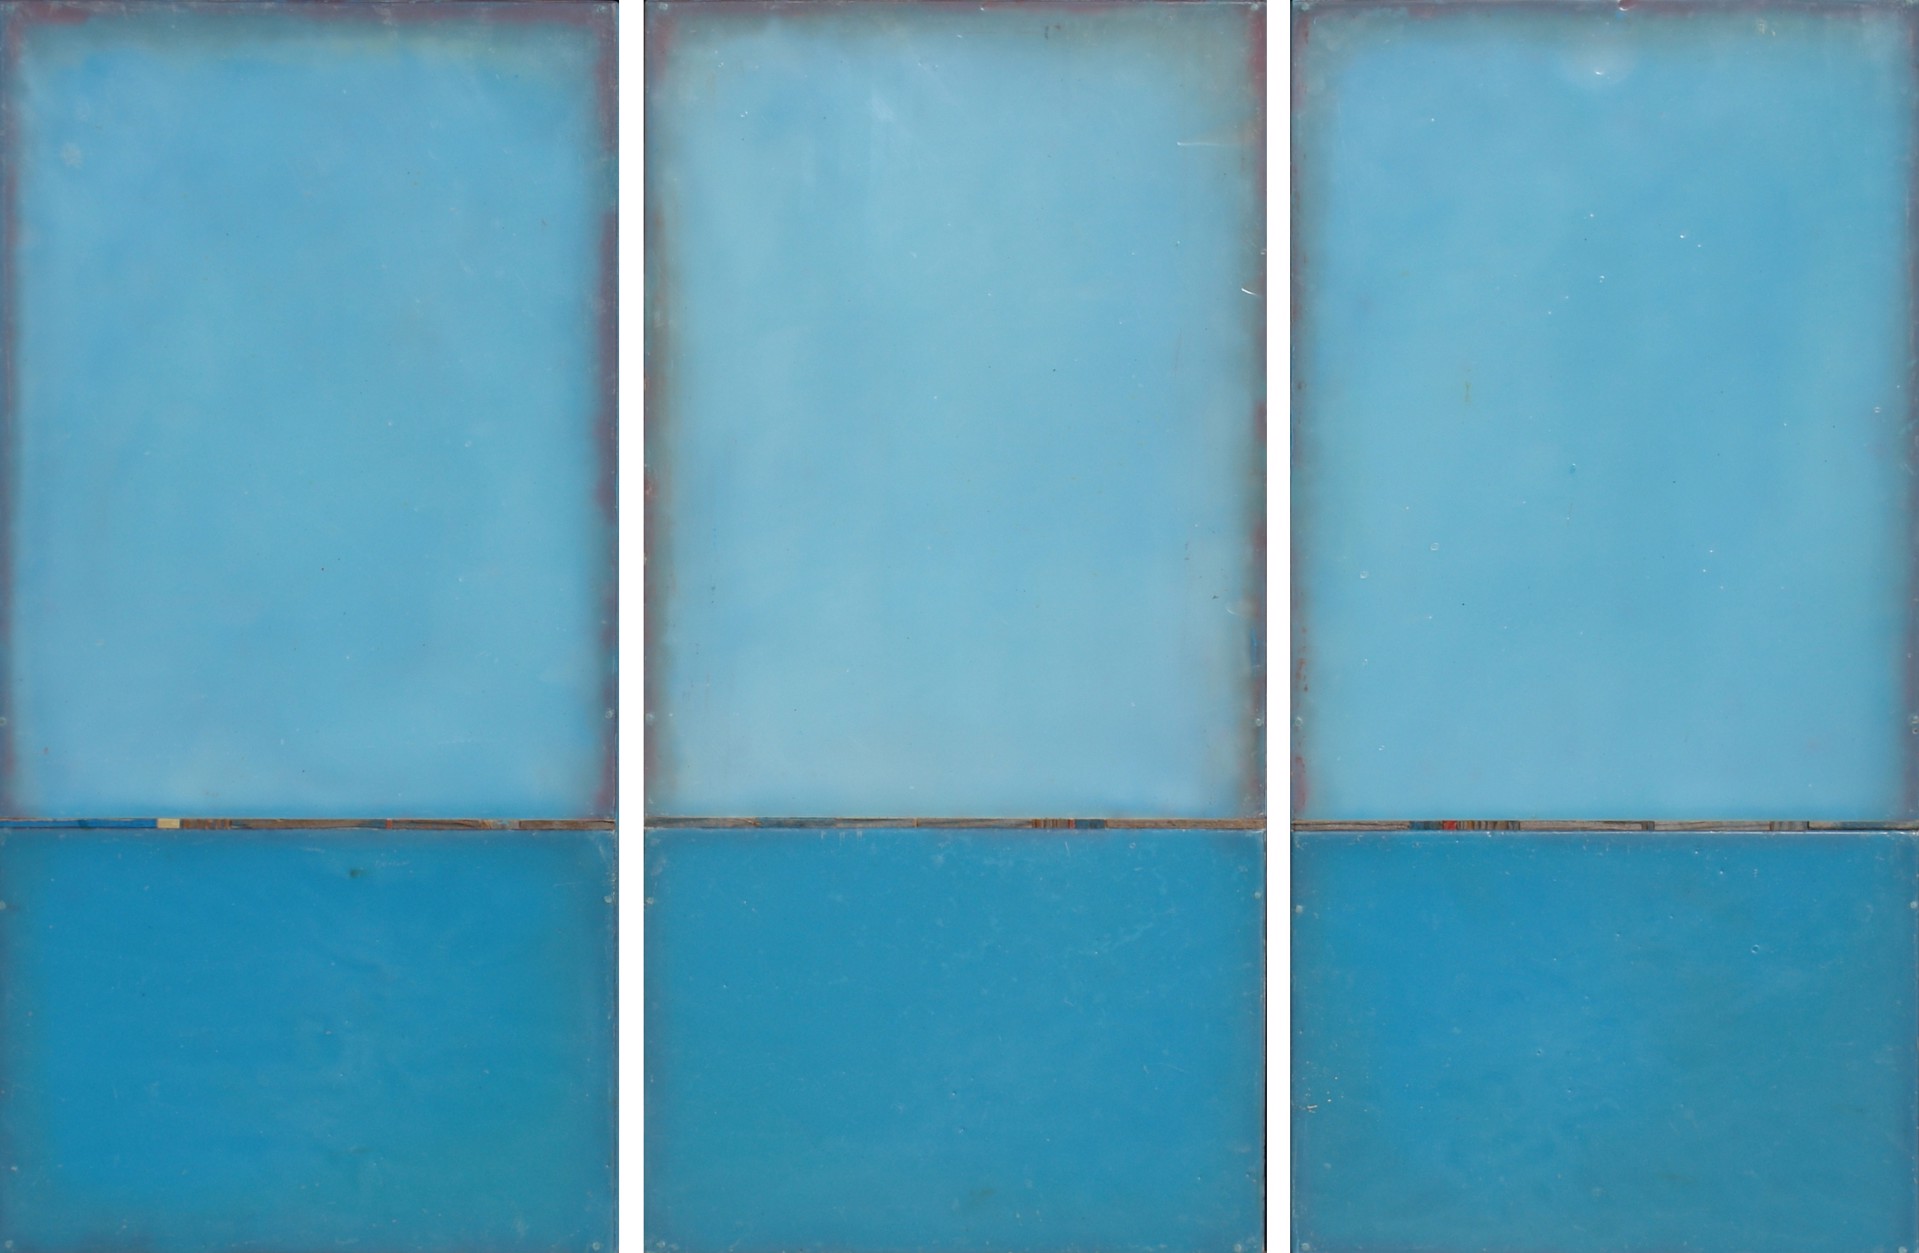 Out of the Sea (Triptych)  by Dusty Griffith